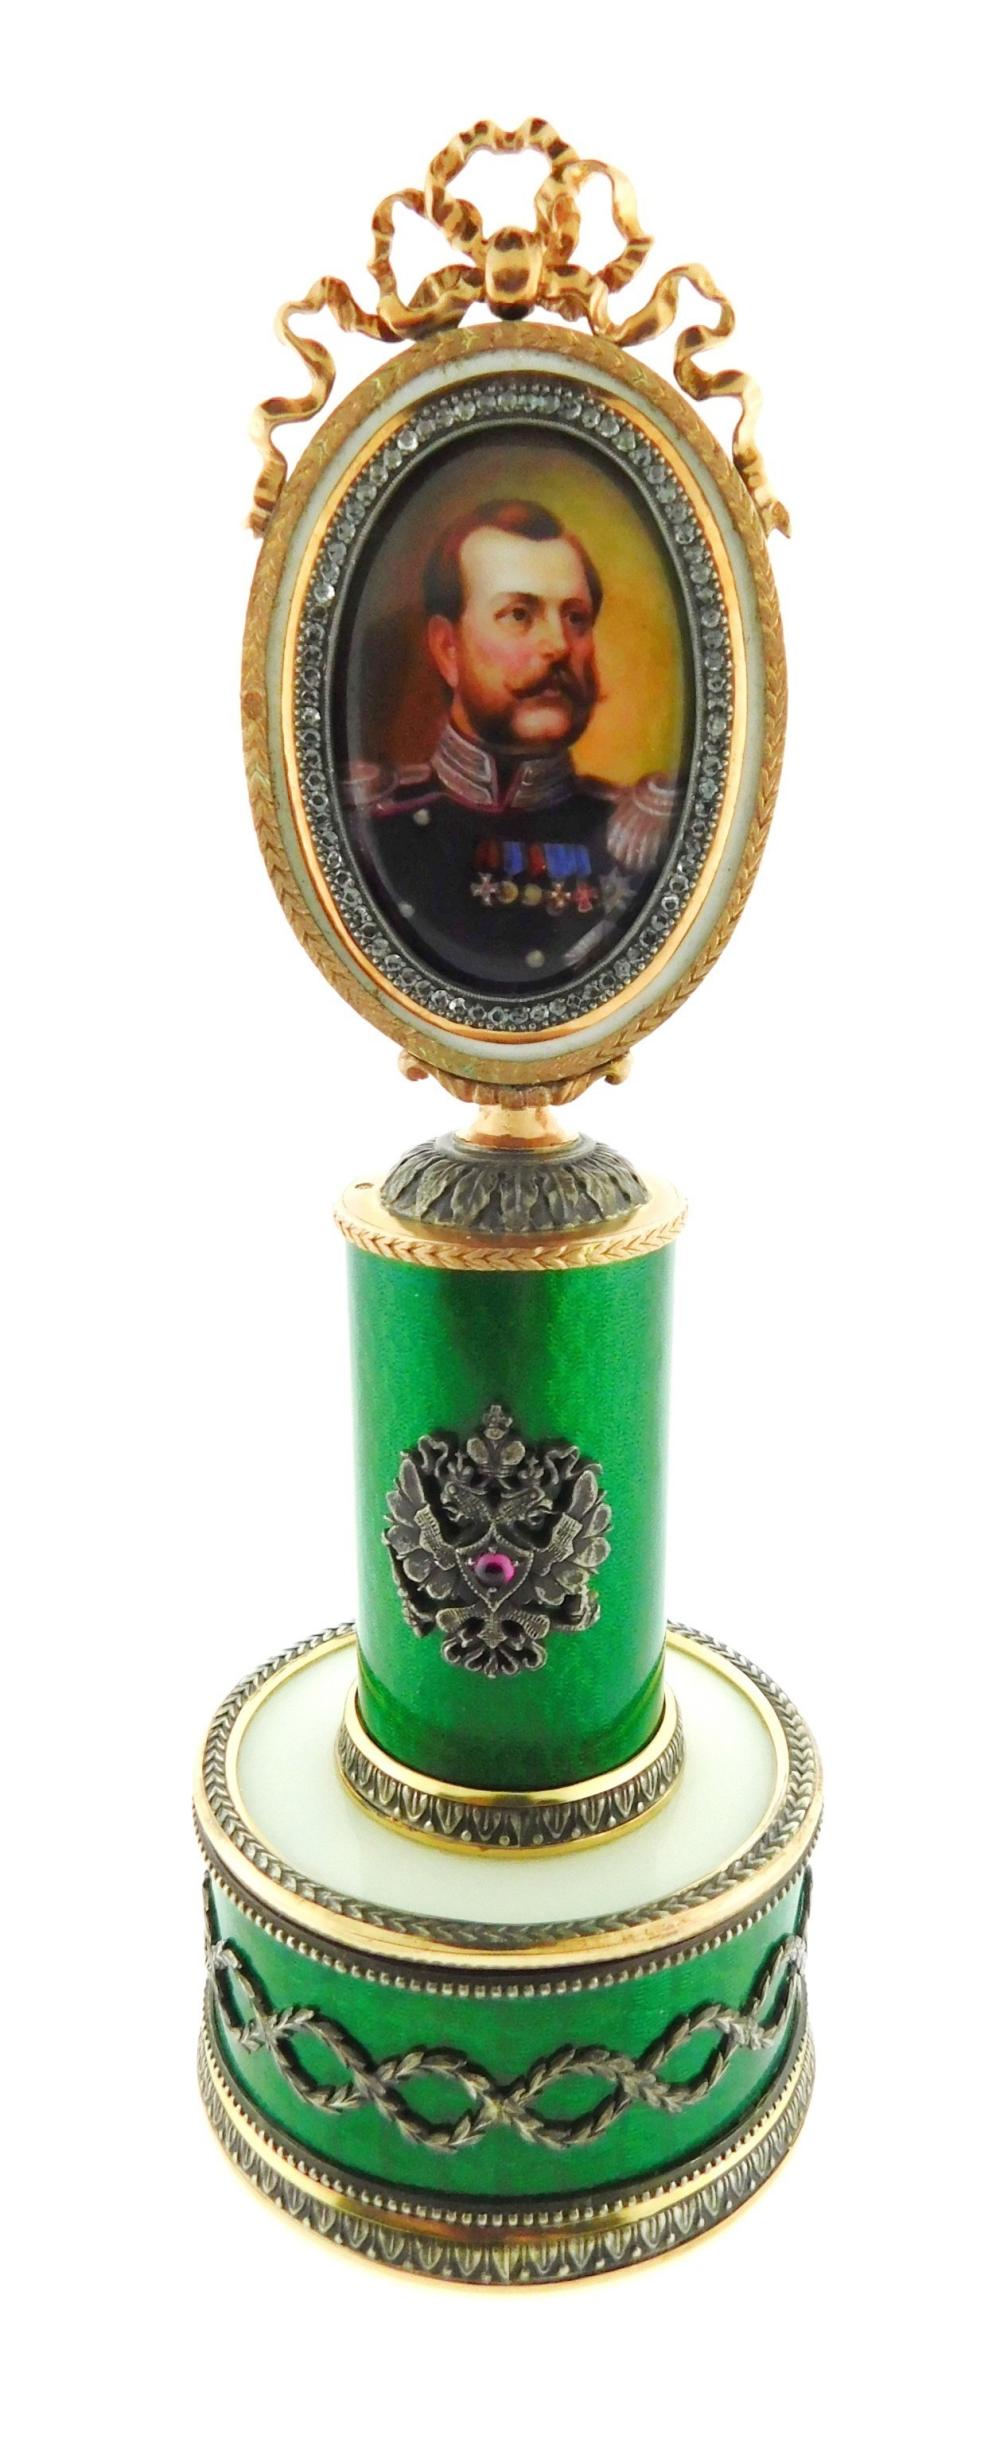 FABERGE STYLE MINIATURE PAINTING 2e2d70